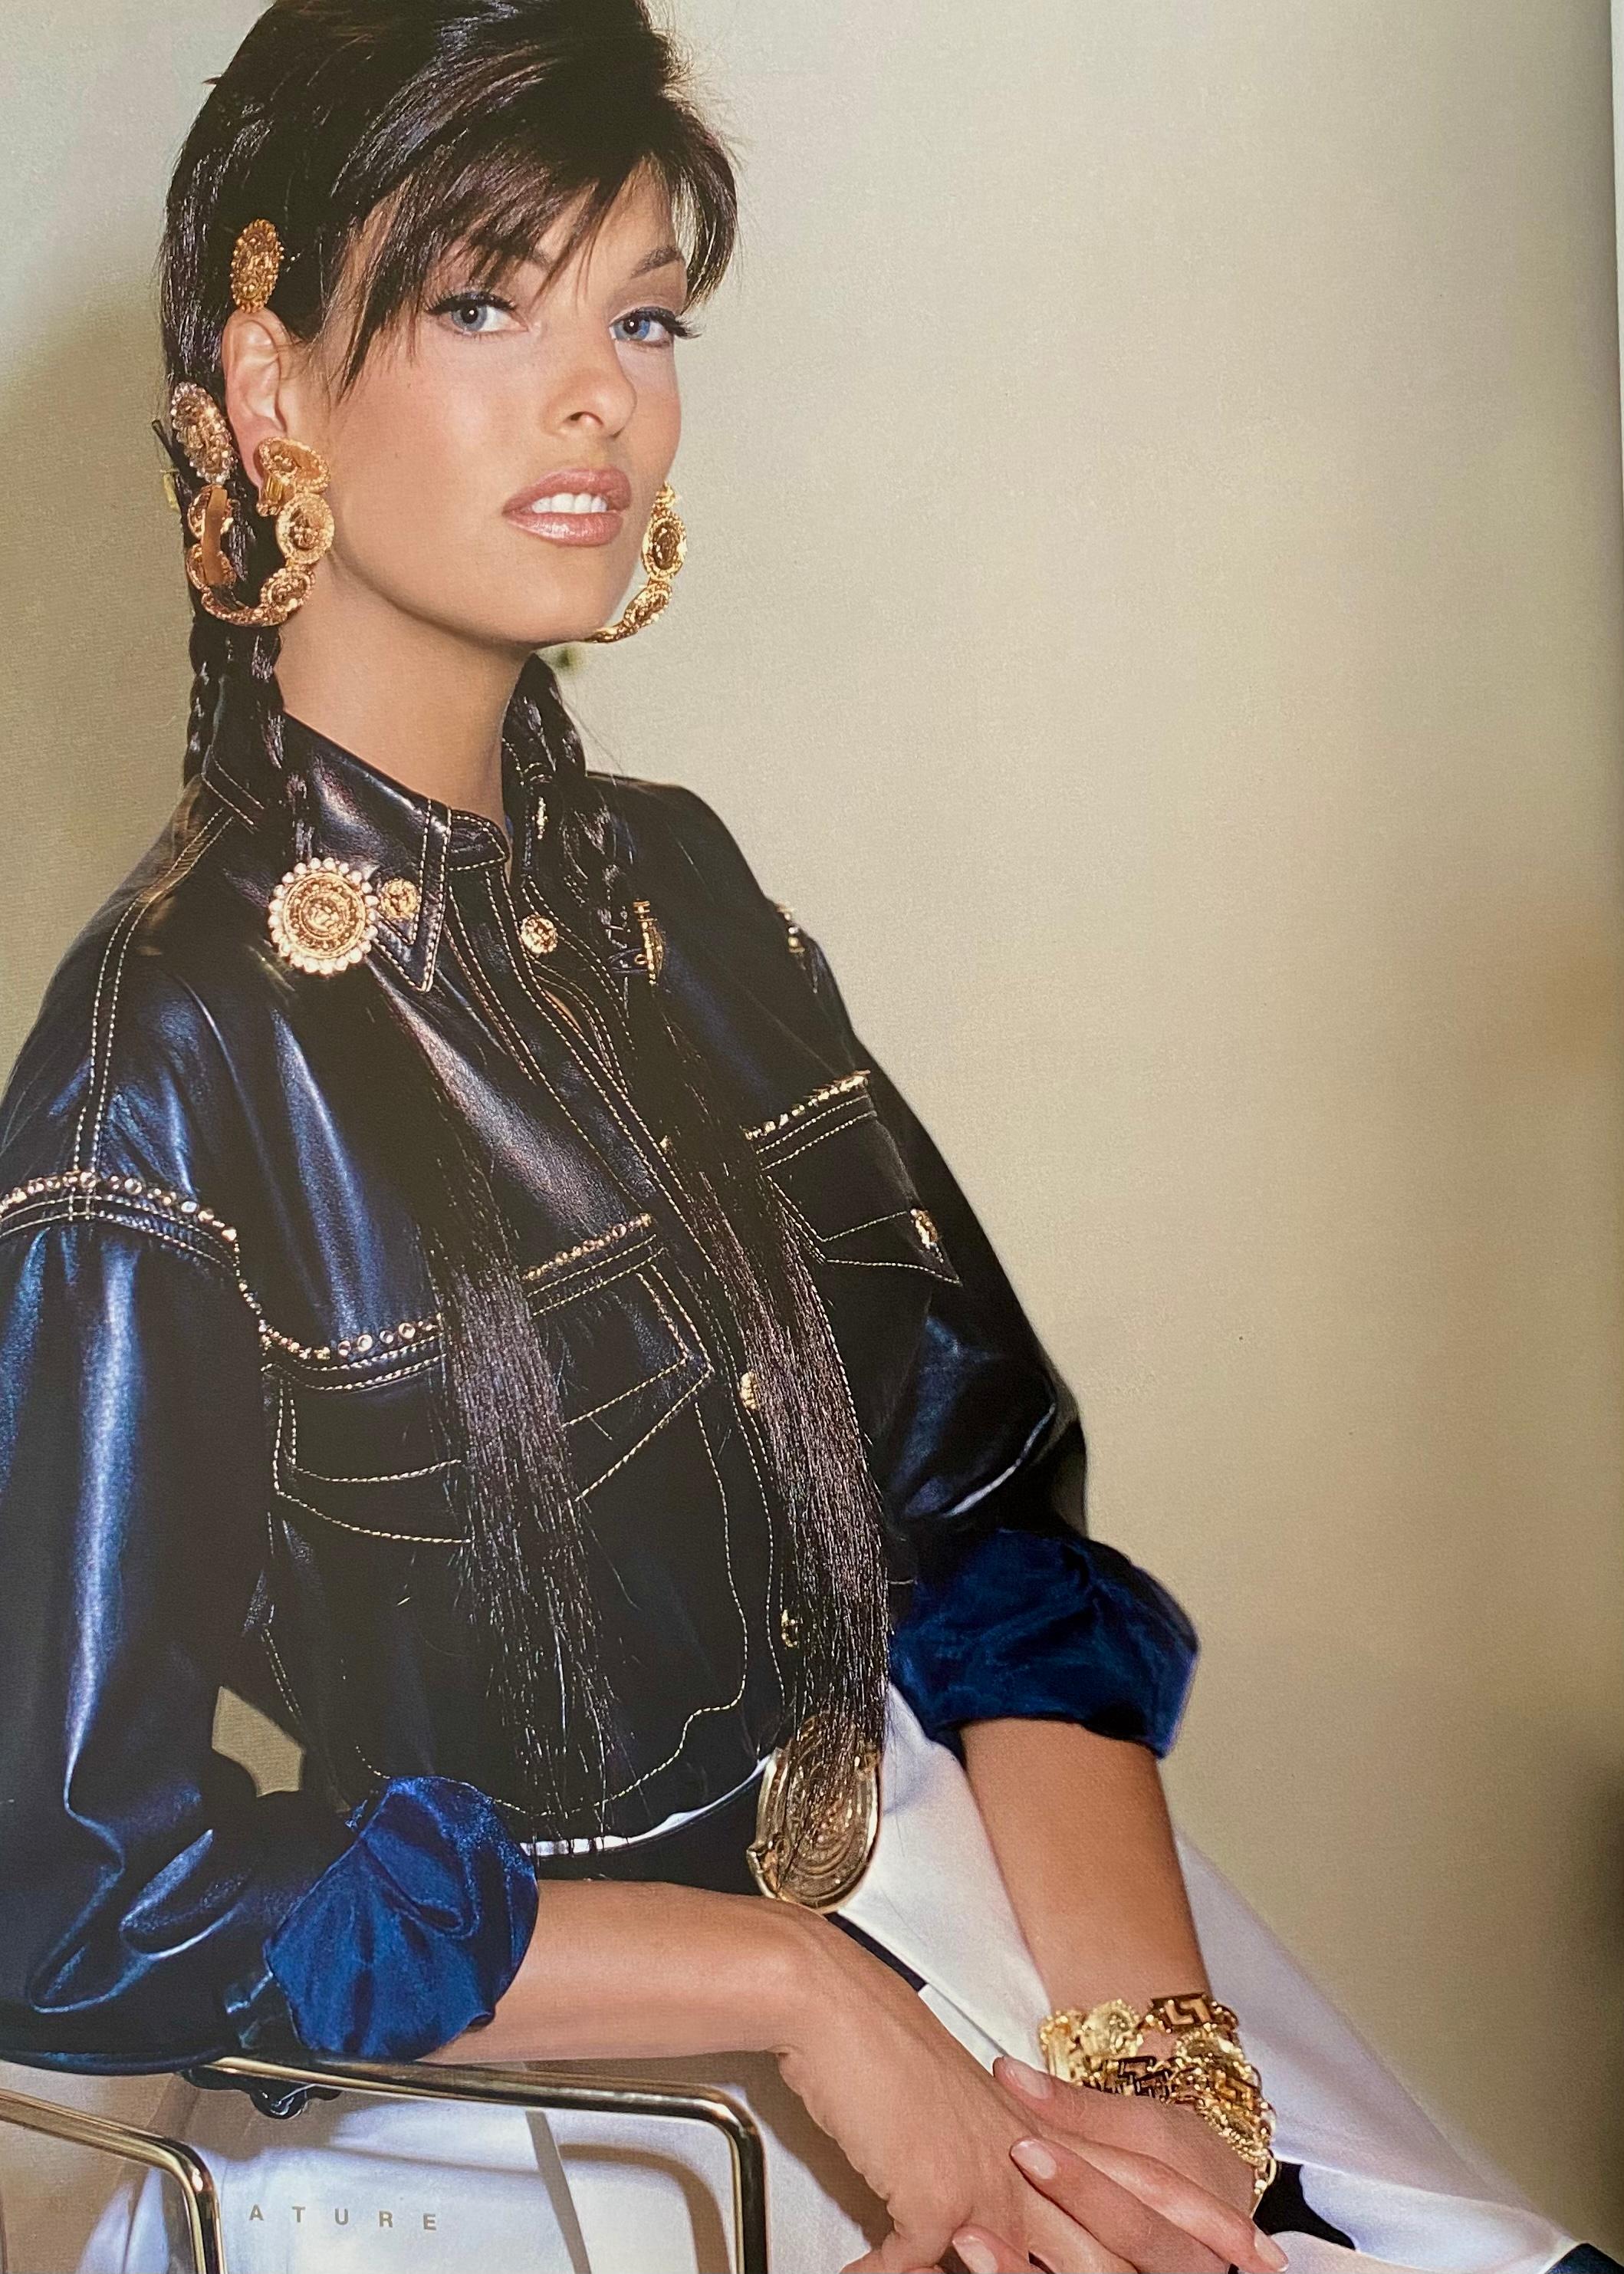 From the F/W 1992 Miss S&M ('Bondage') collection, this gorgeous rhinestone-studded leather top is nearly identical to the one seen in look 39 modeled by Marpessa Hennink in the collection's runway. This top pops with bright gold stitching and a row